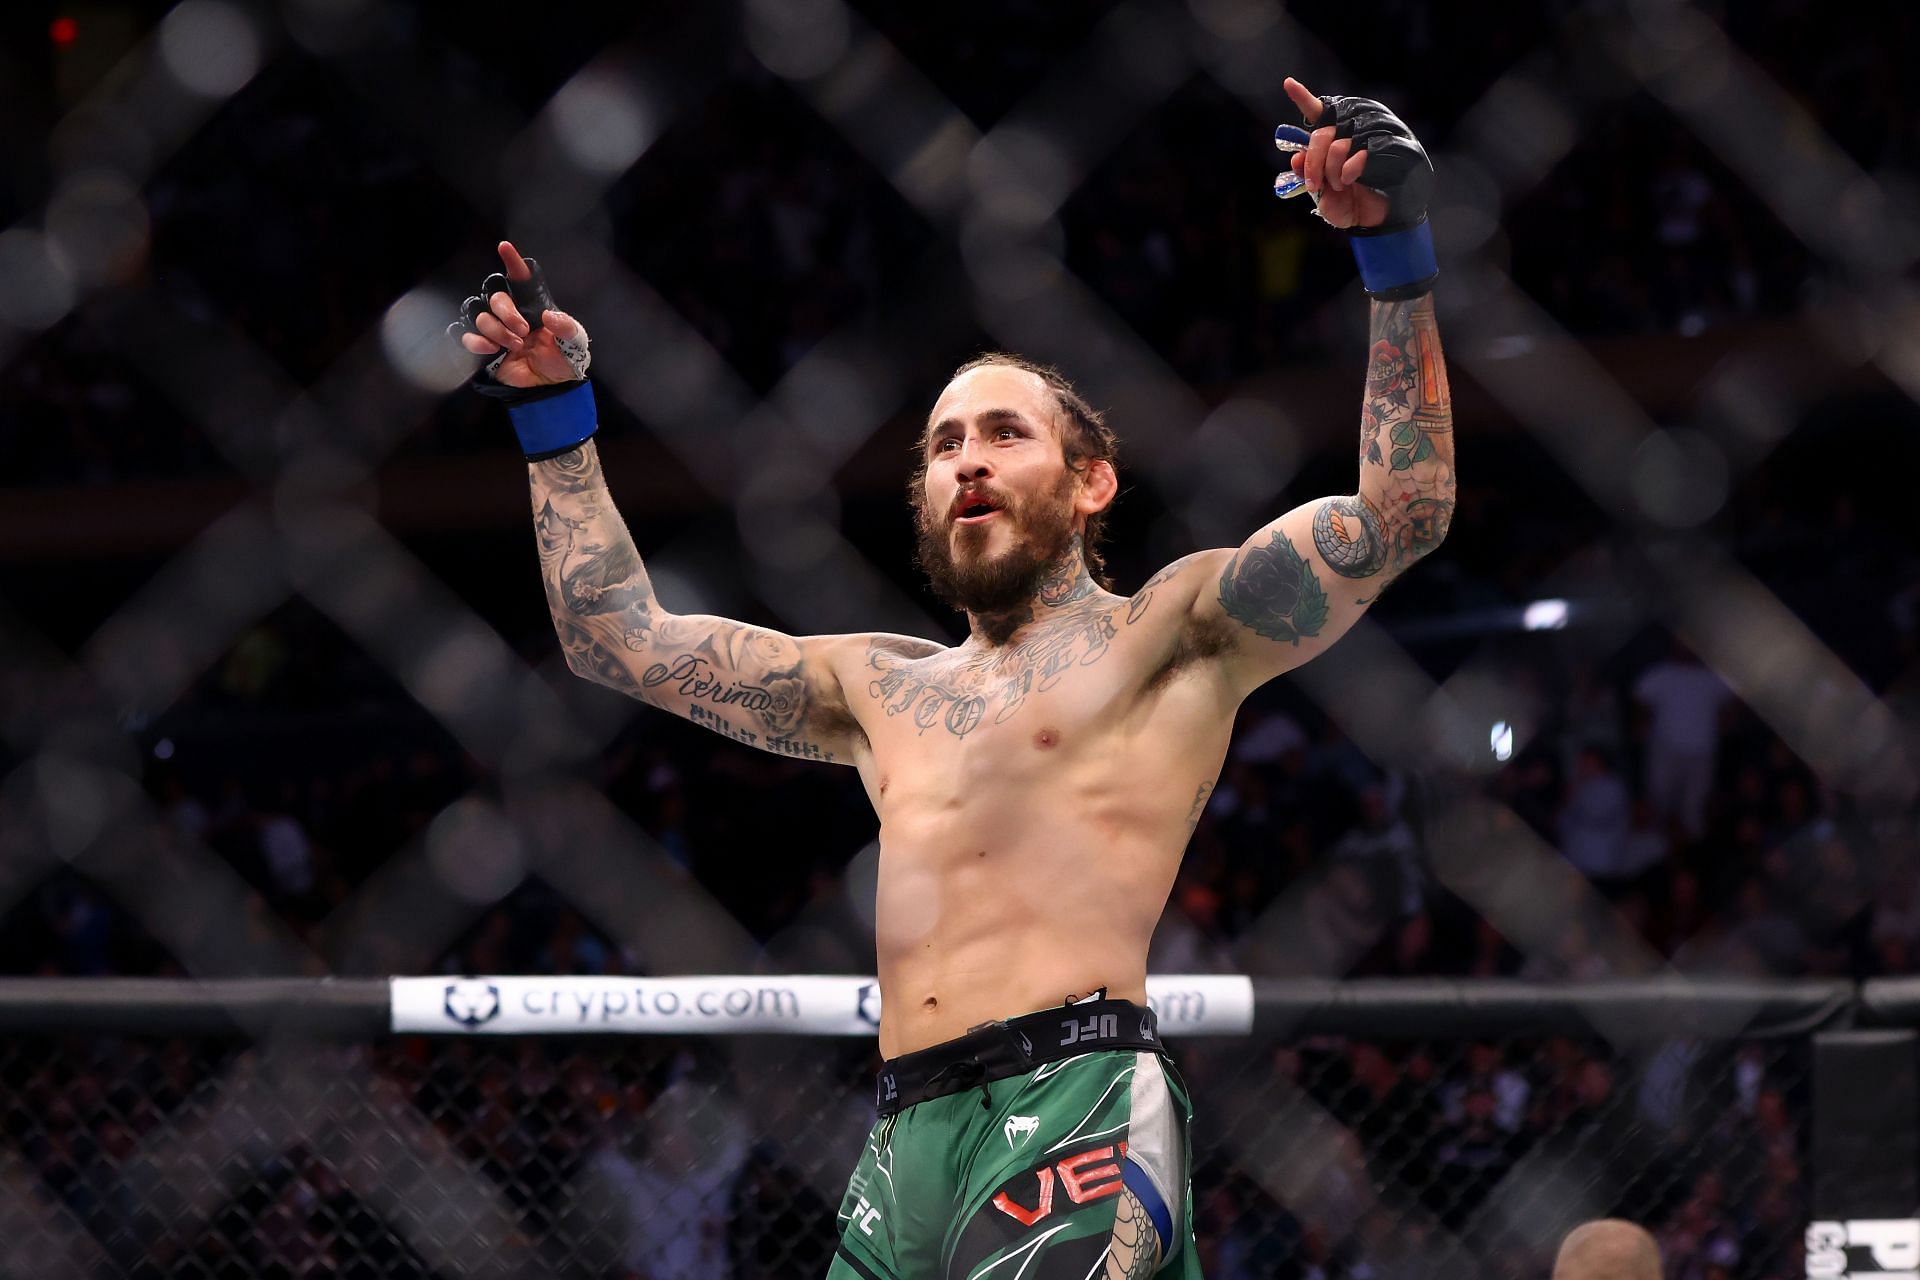 Marlon Vera has gone from being considered an action fighter to a genuine title contender